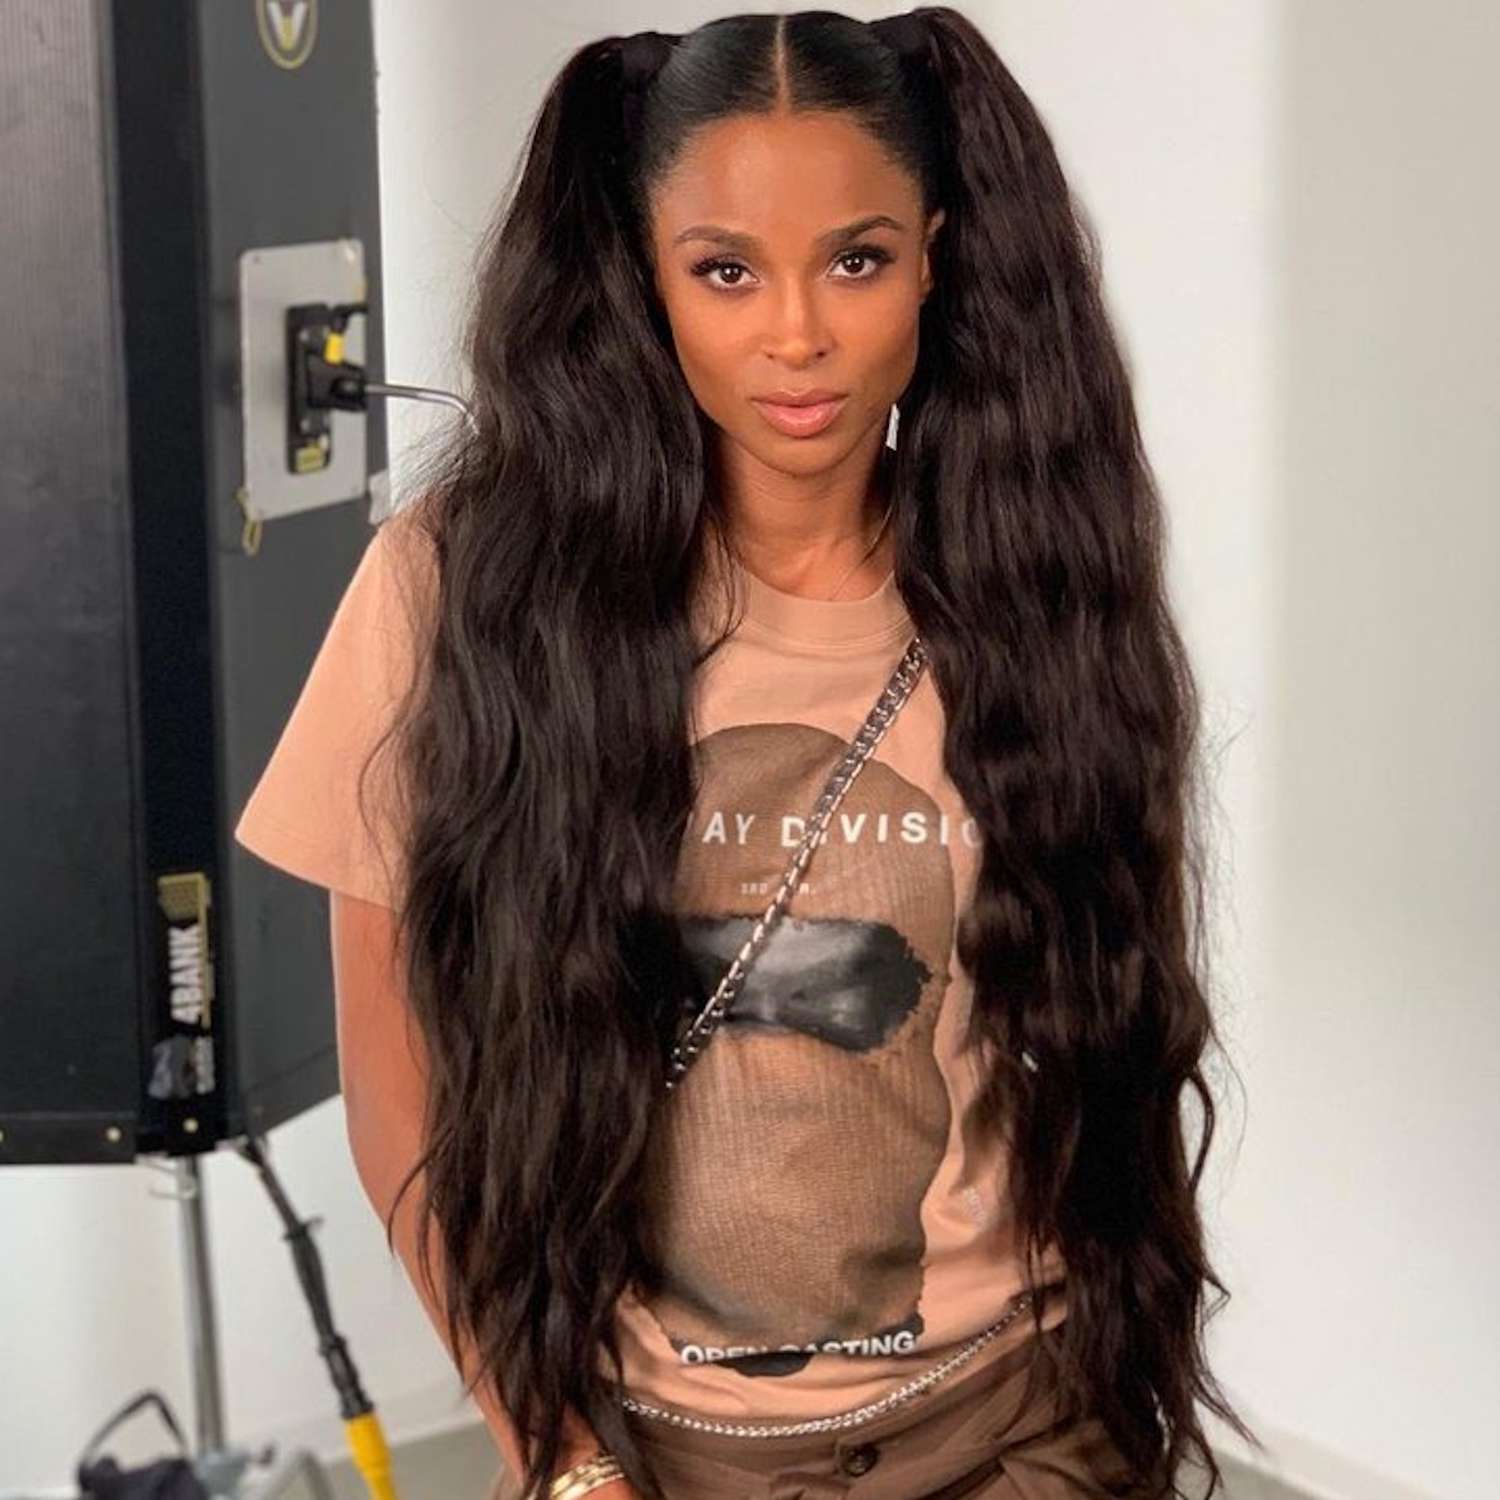 Ciara wears a voluminous, wavy high pigtails hairstyle and a graphic tee